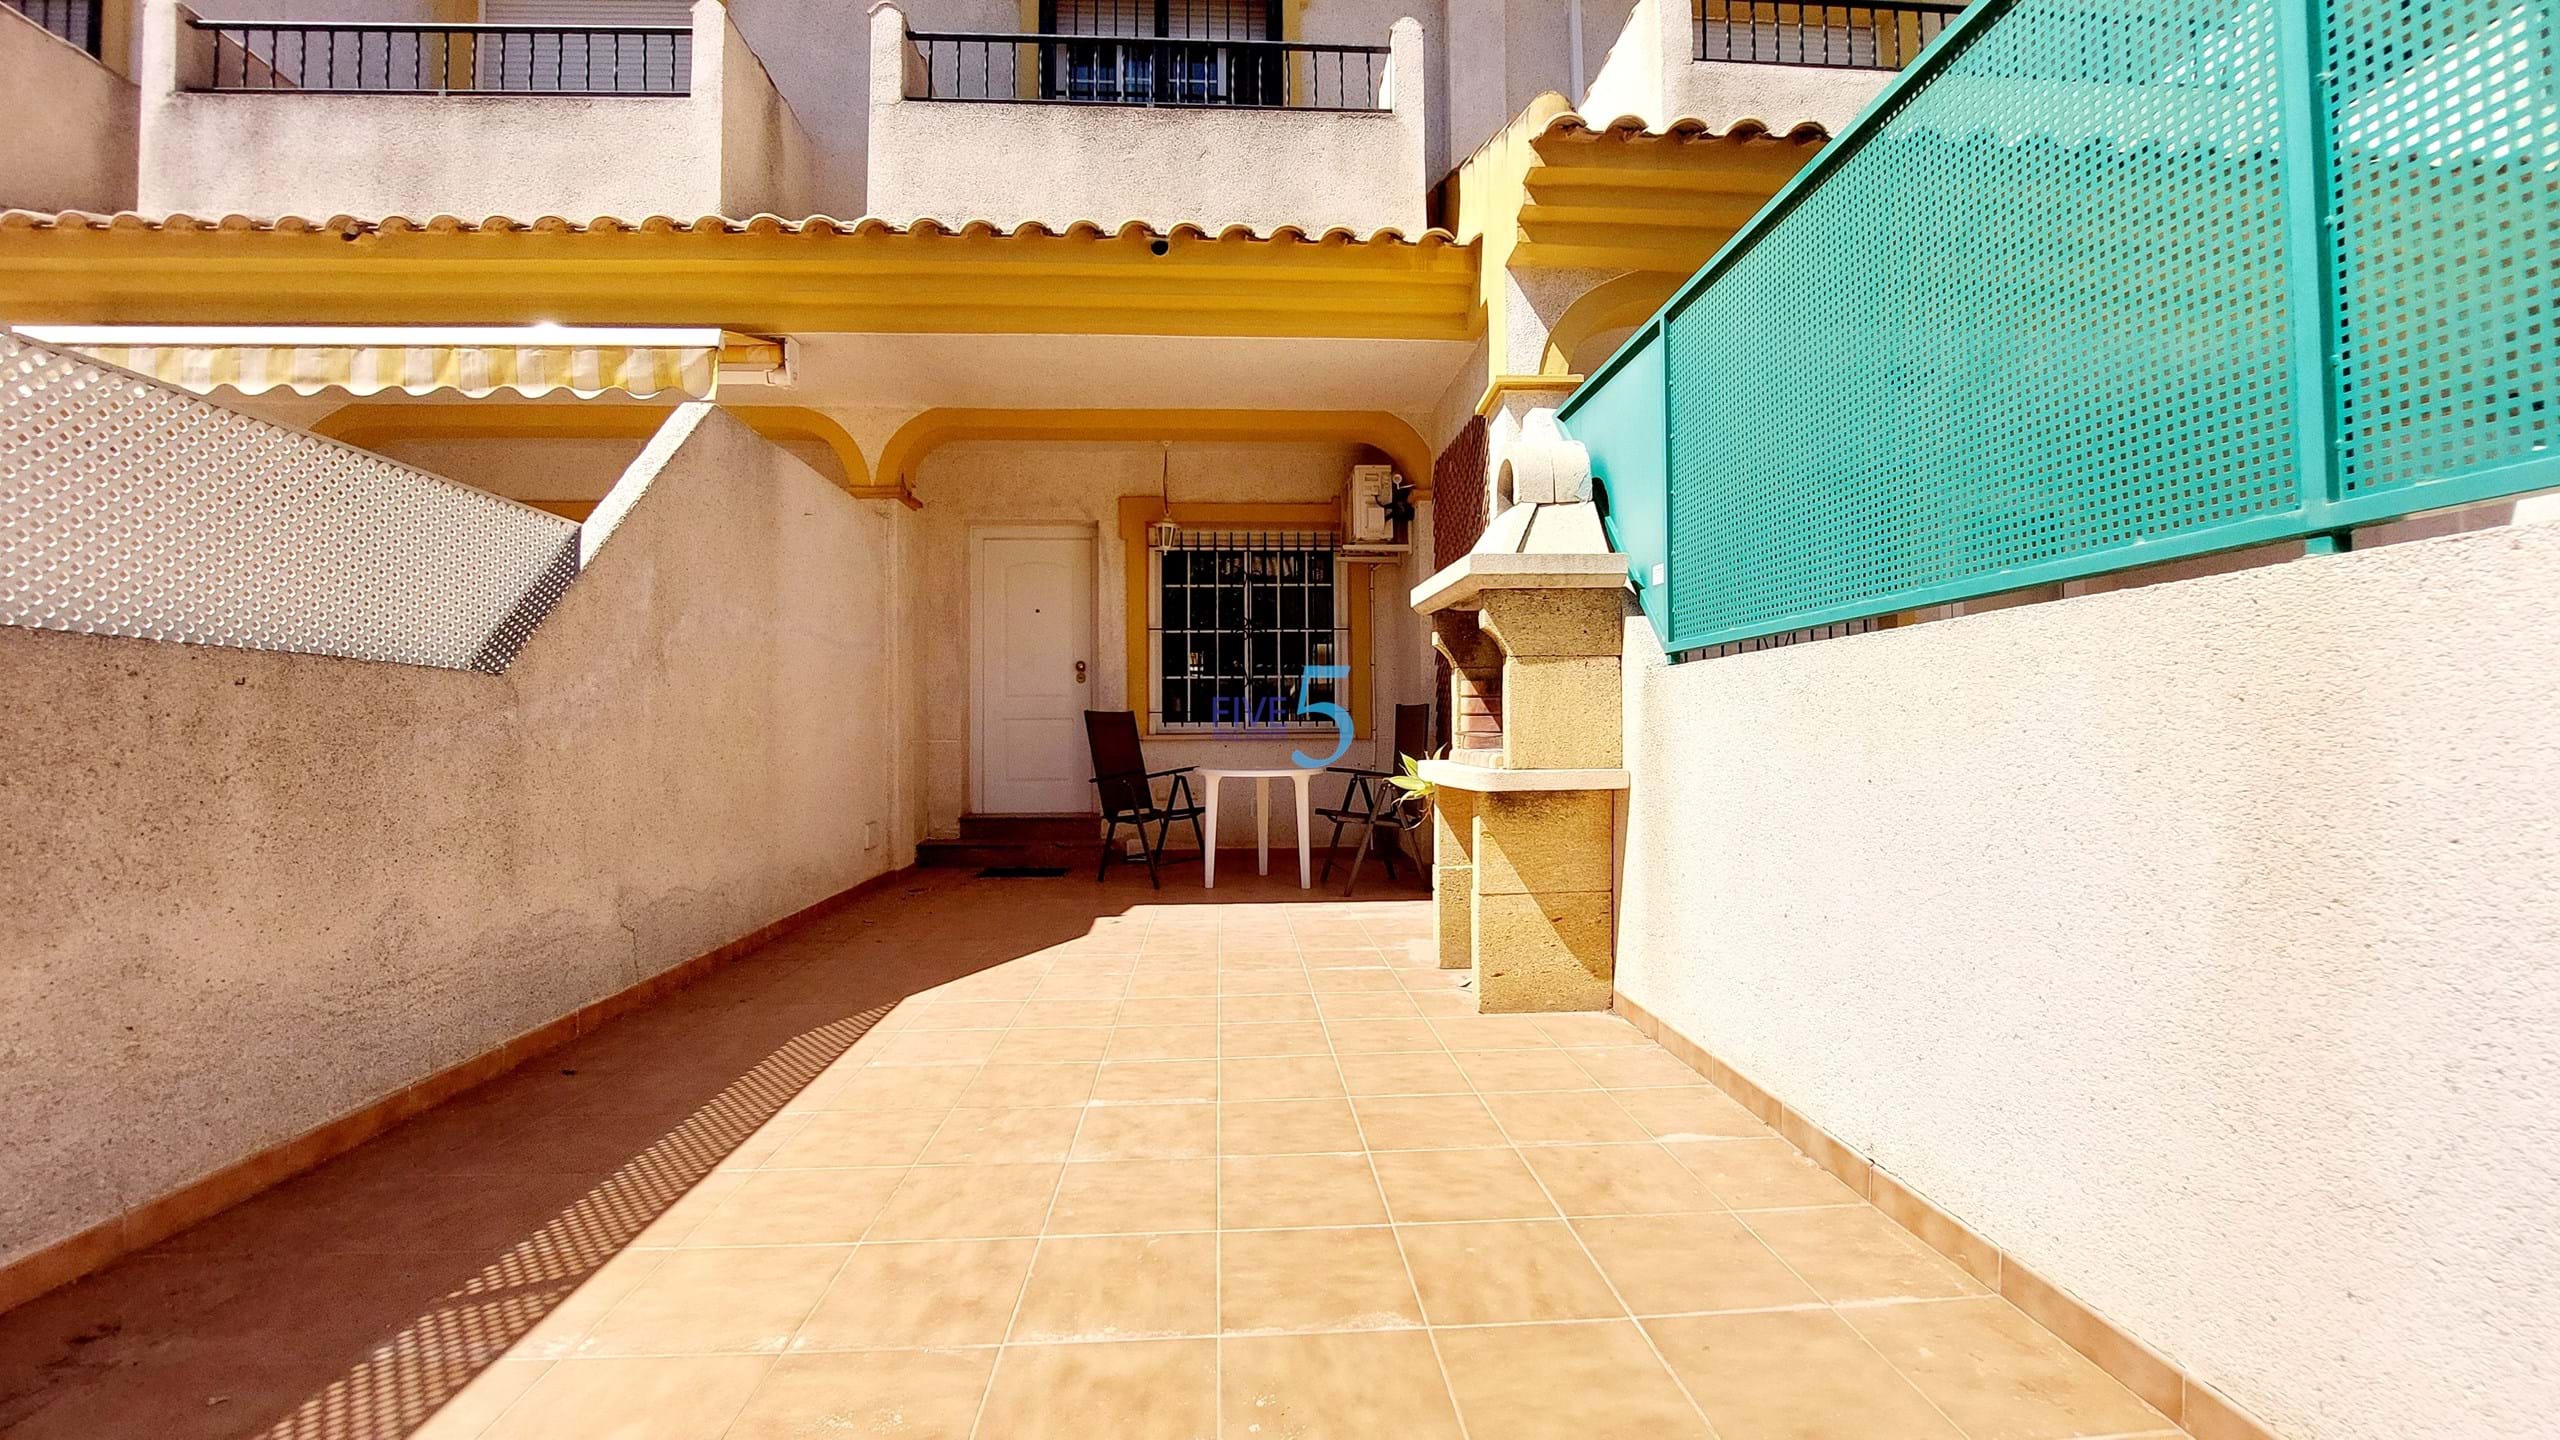 Townhouse for sale in San Pedro del Pinatar and San Javier 25